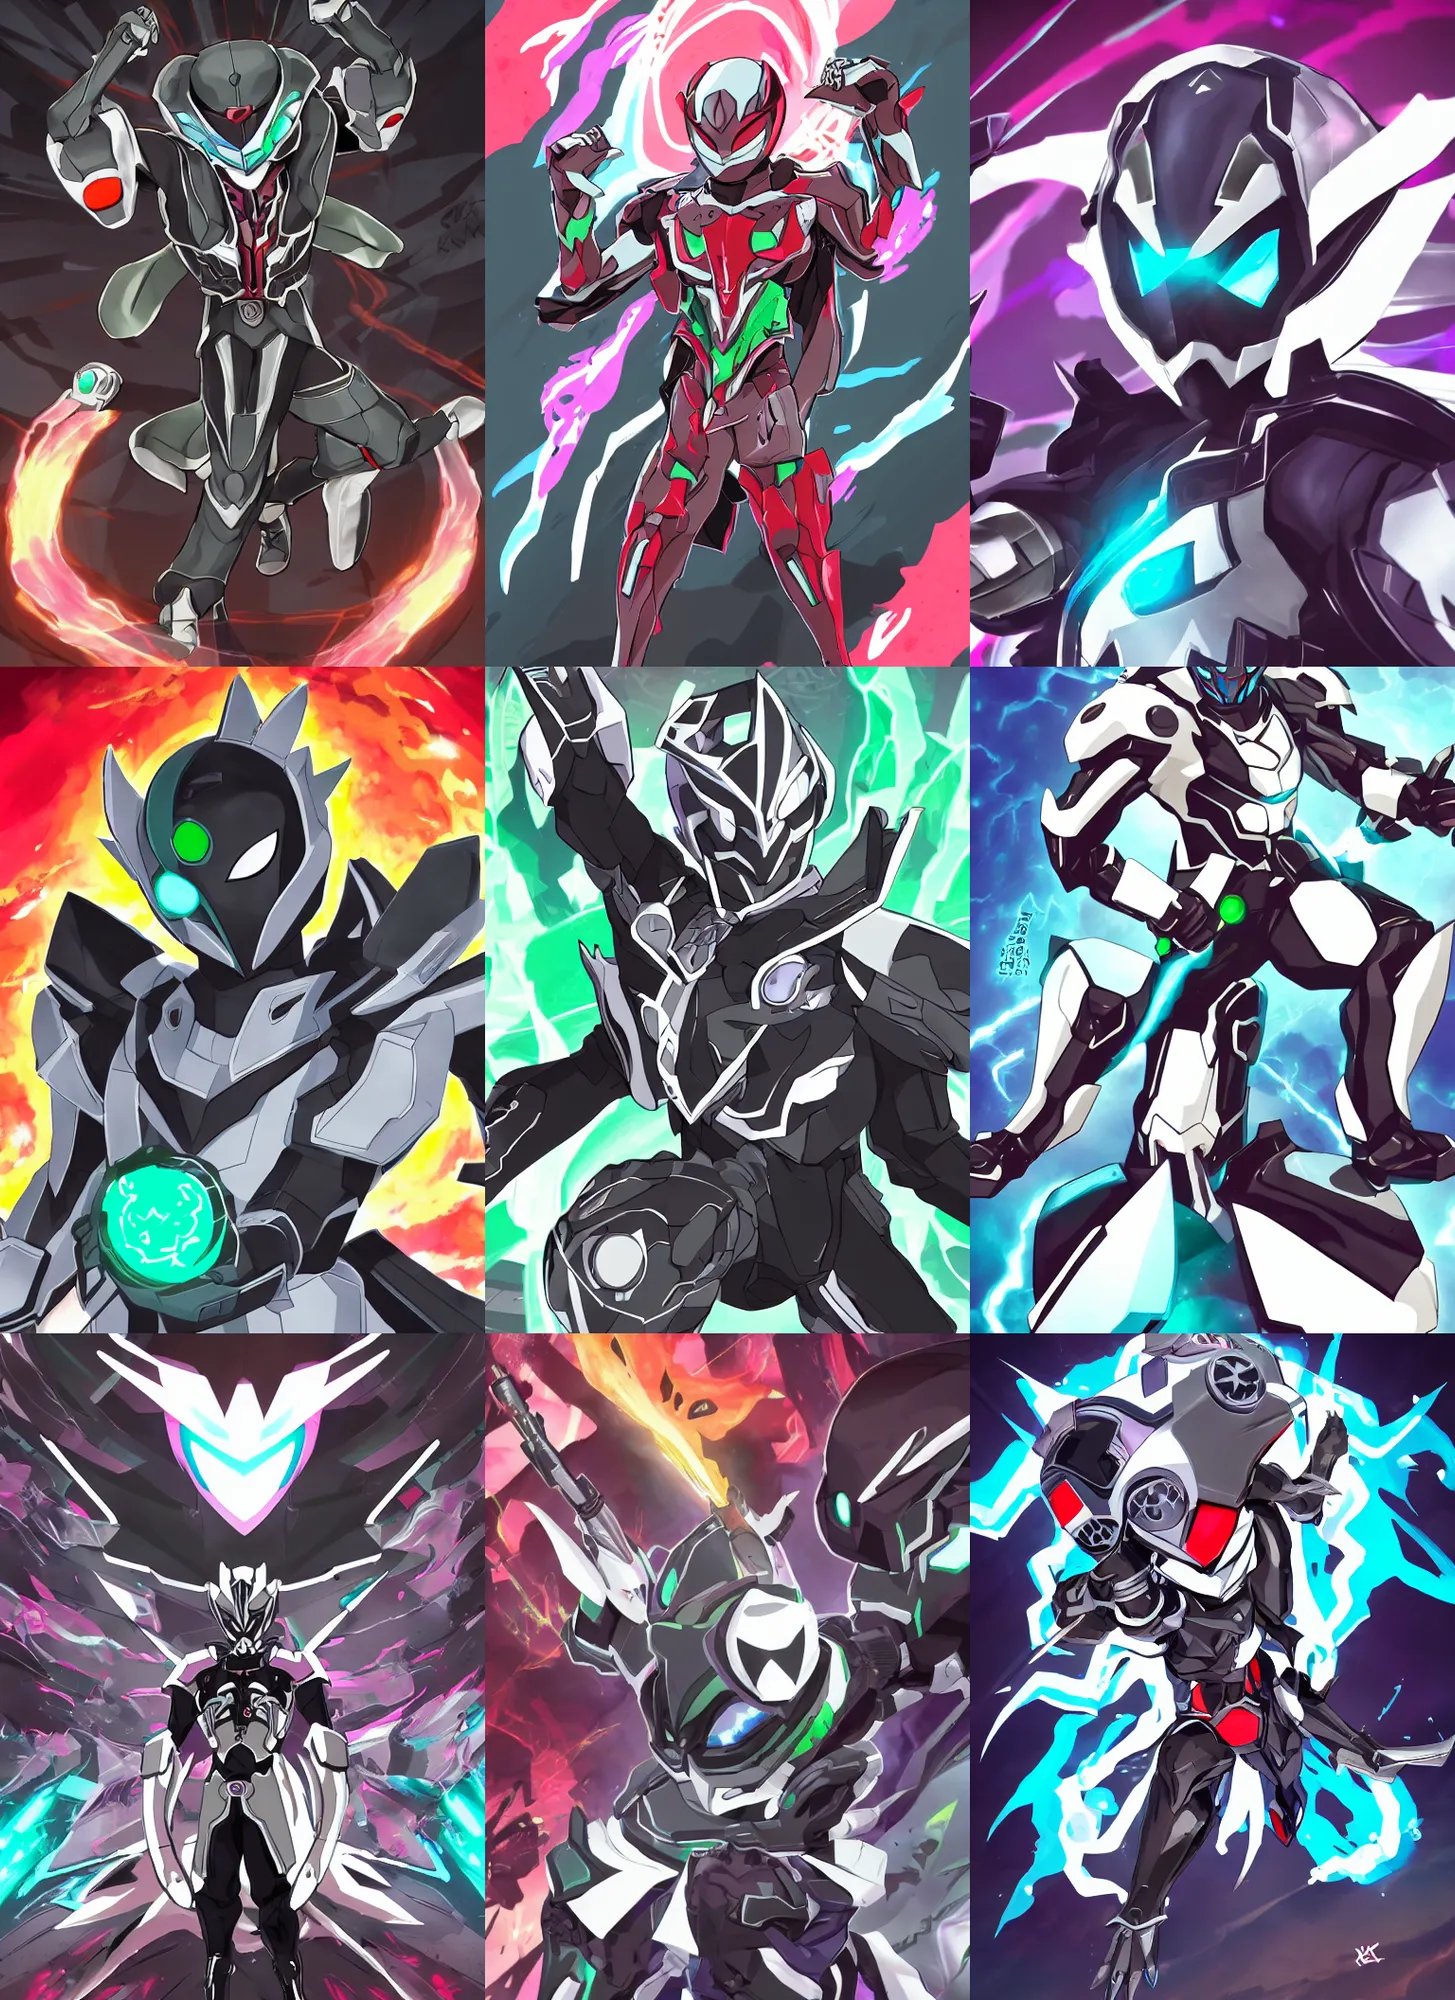 Prompt: illustrated character portrait of ghost kamen rider doing a henshin pose, league of legends splash art, kamen rider, kamen rider ghost, tokusatsu, in the style of studio trigger studio bones and production i. g., animation, anime illustration, studio trigger, studio bones, production i. g.